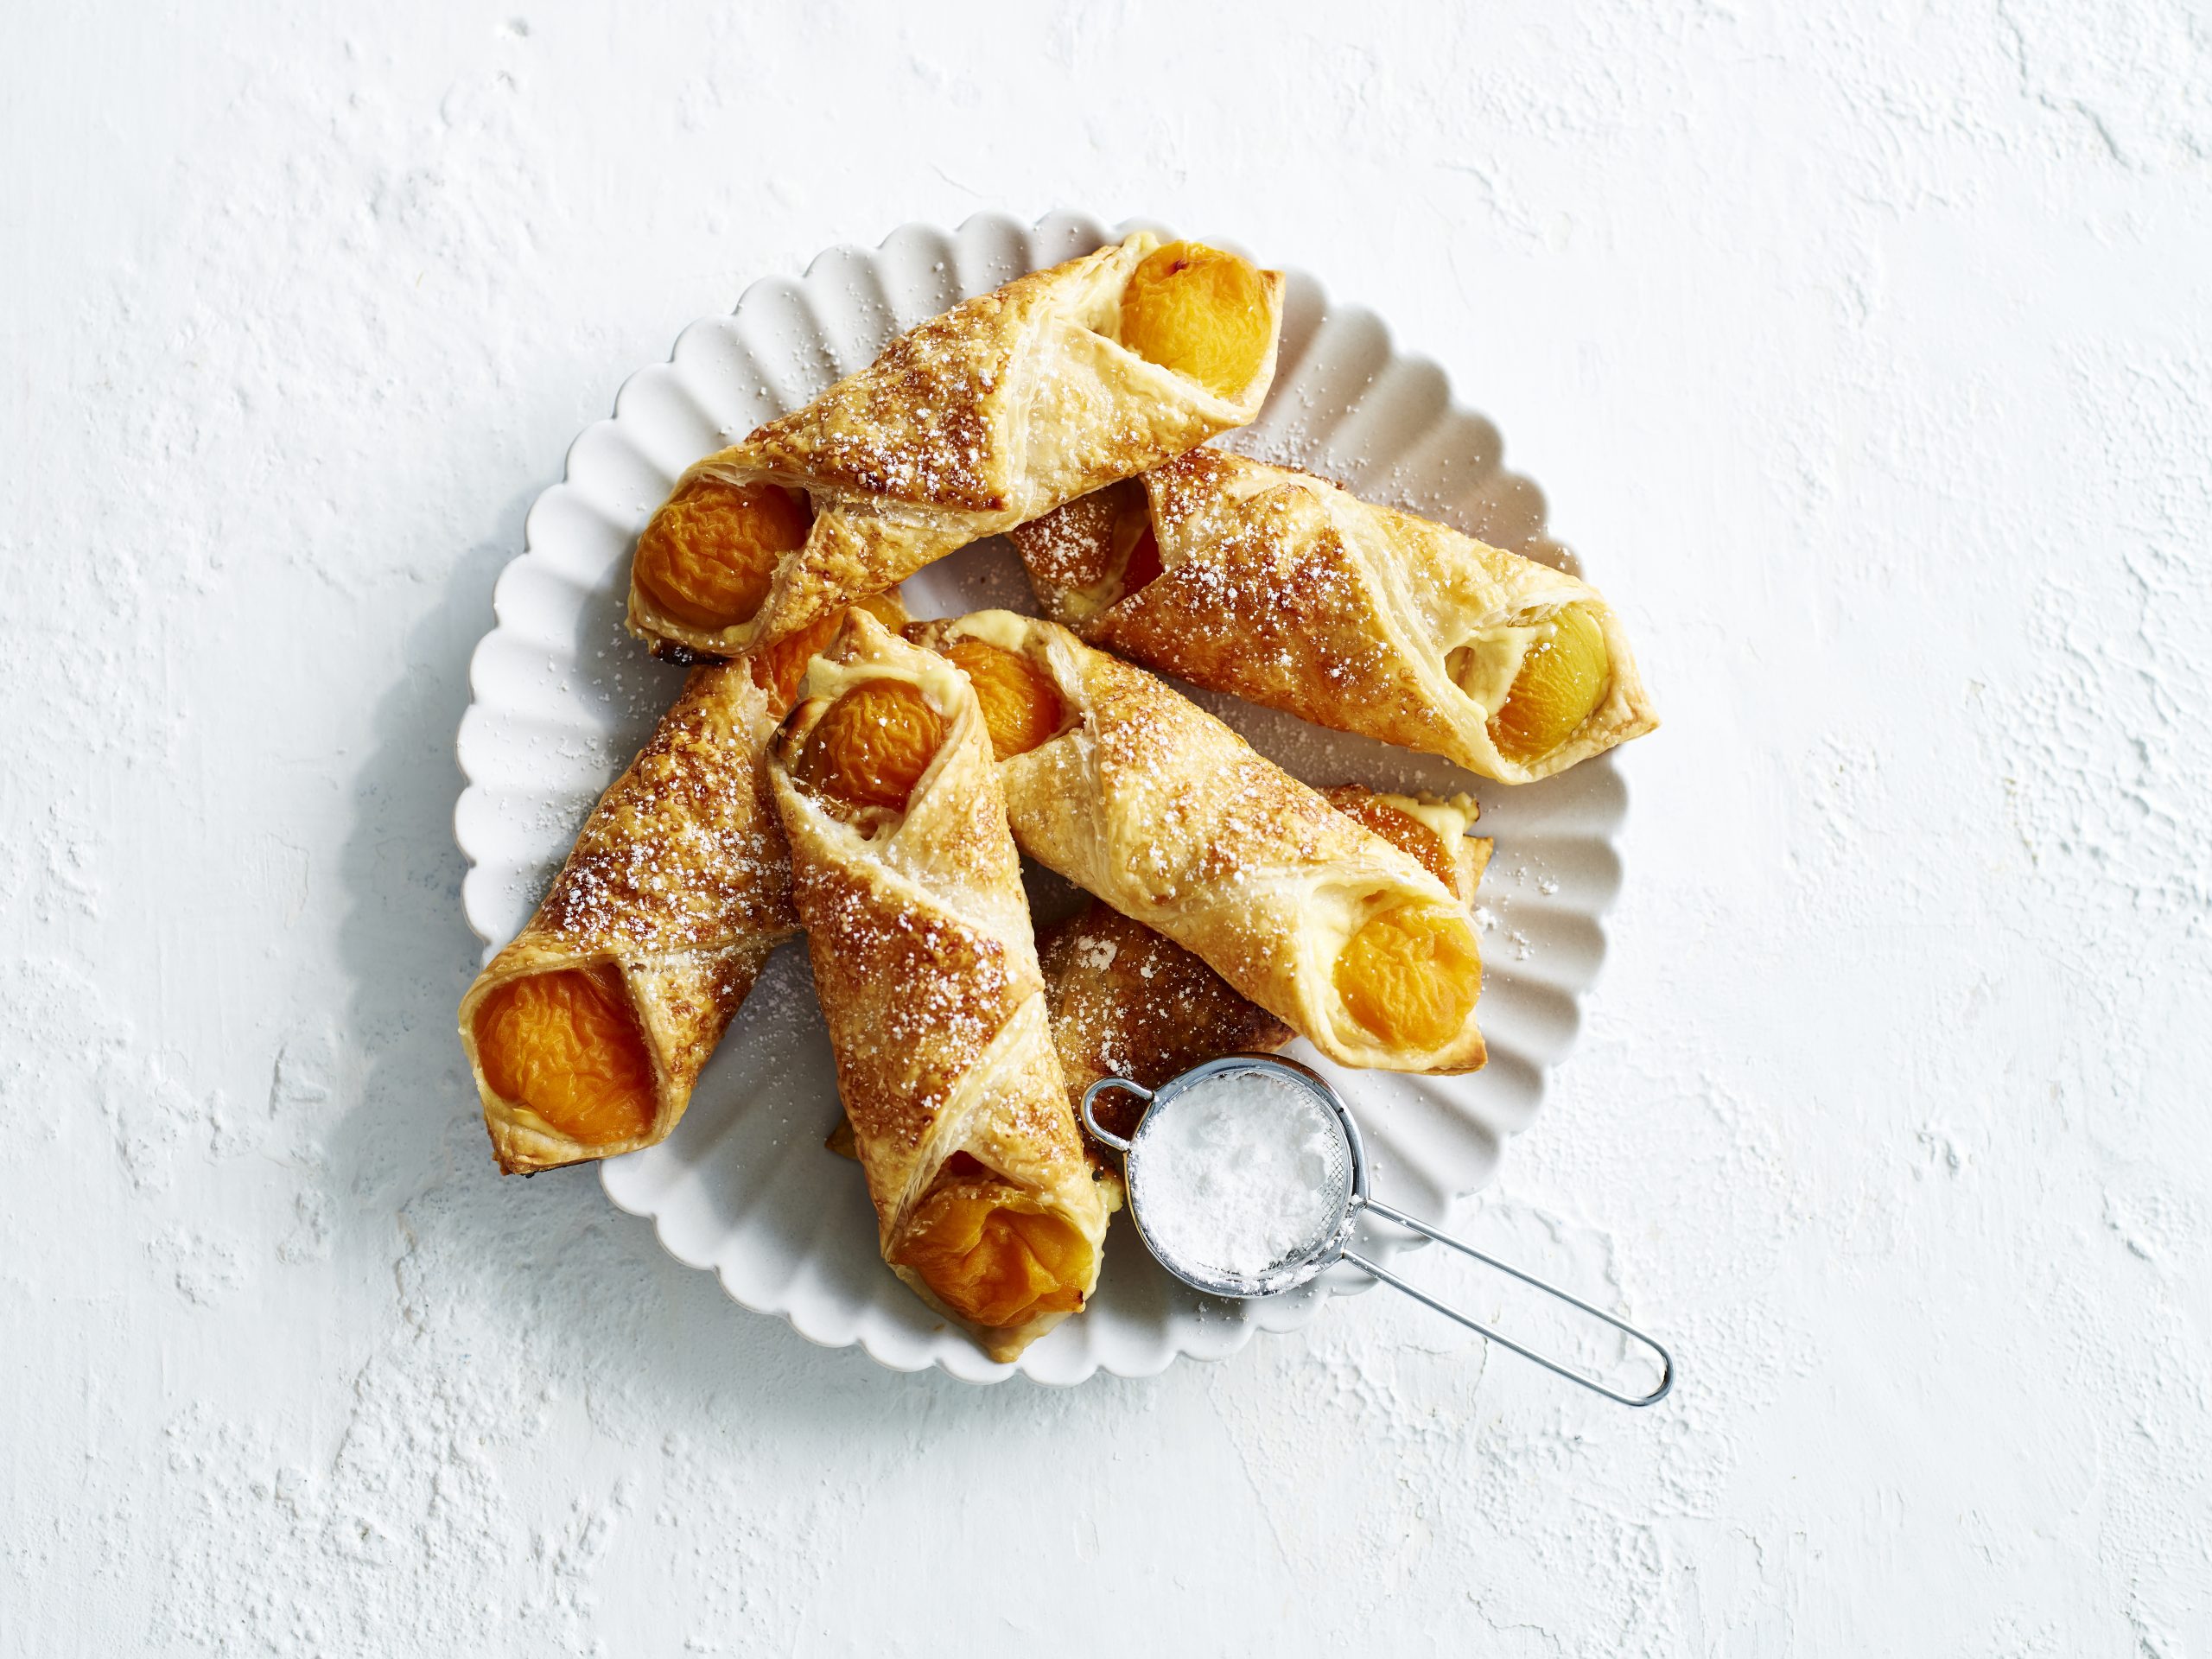 Apricot and Cream Cheese Pastries